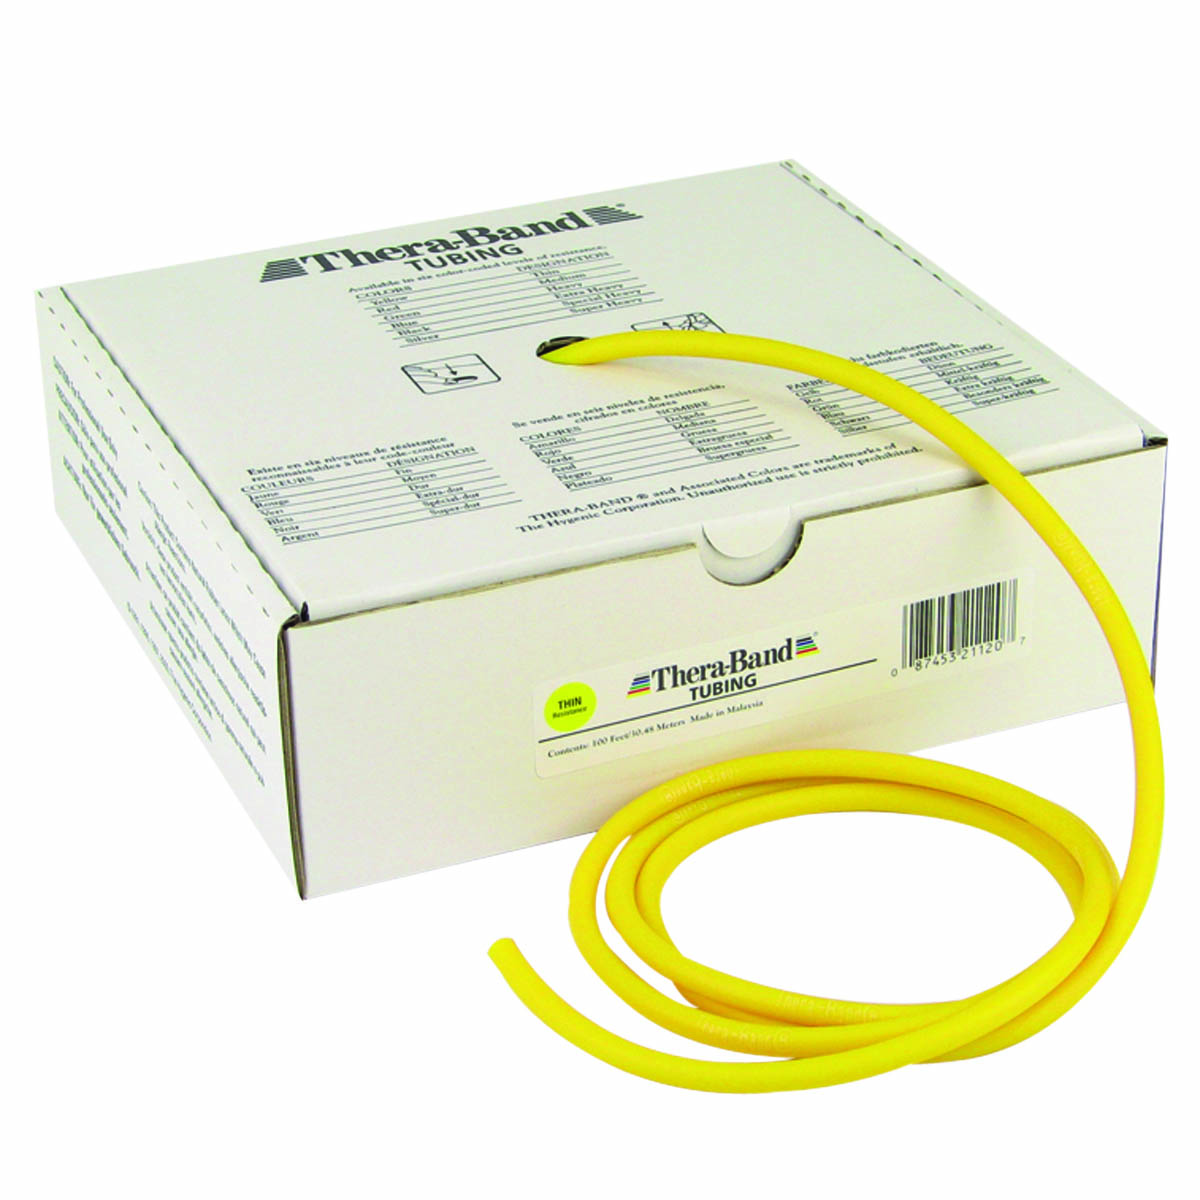 MDL THERABAND TUBING m. 30,5 "A" Giallo